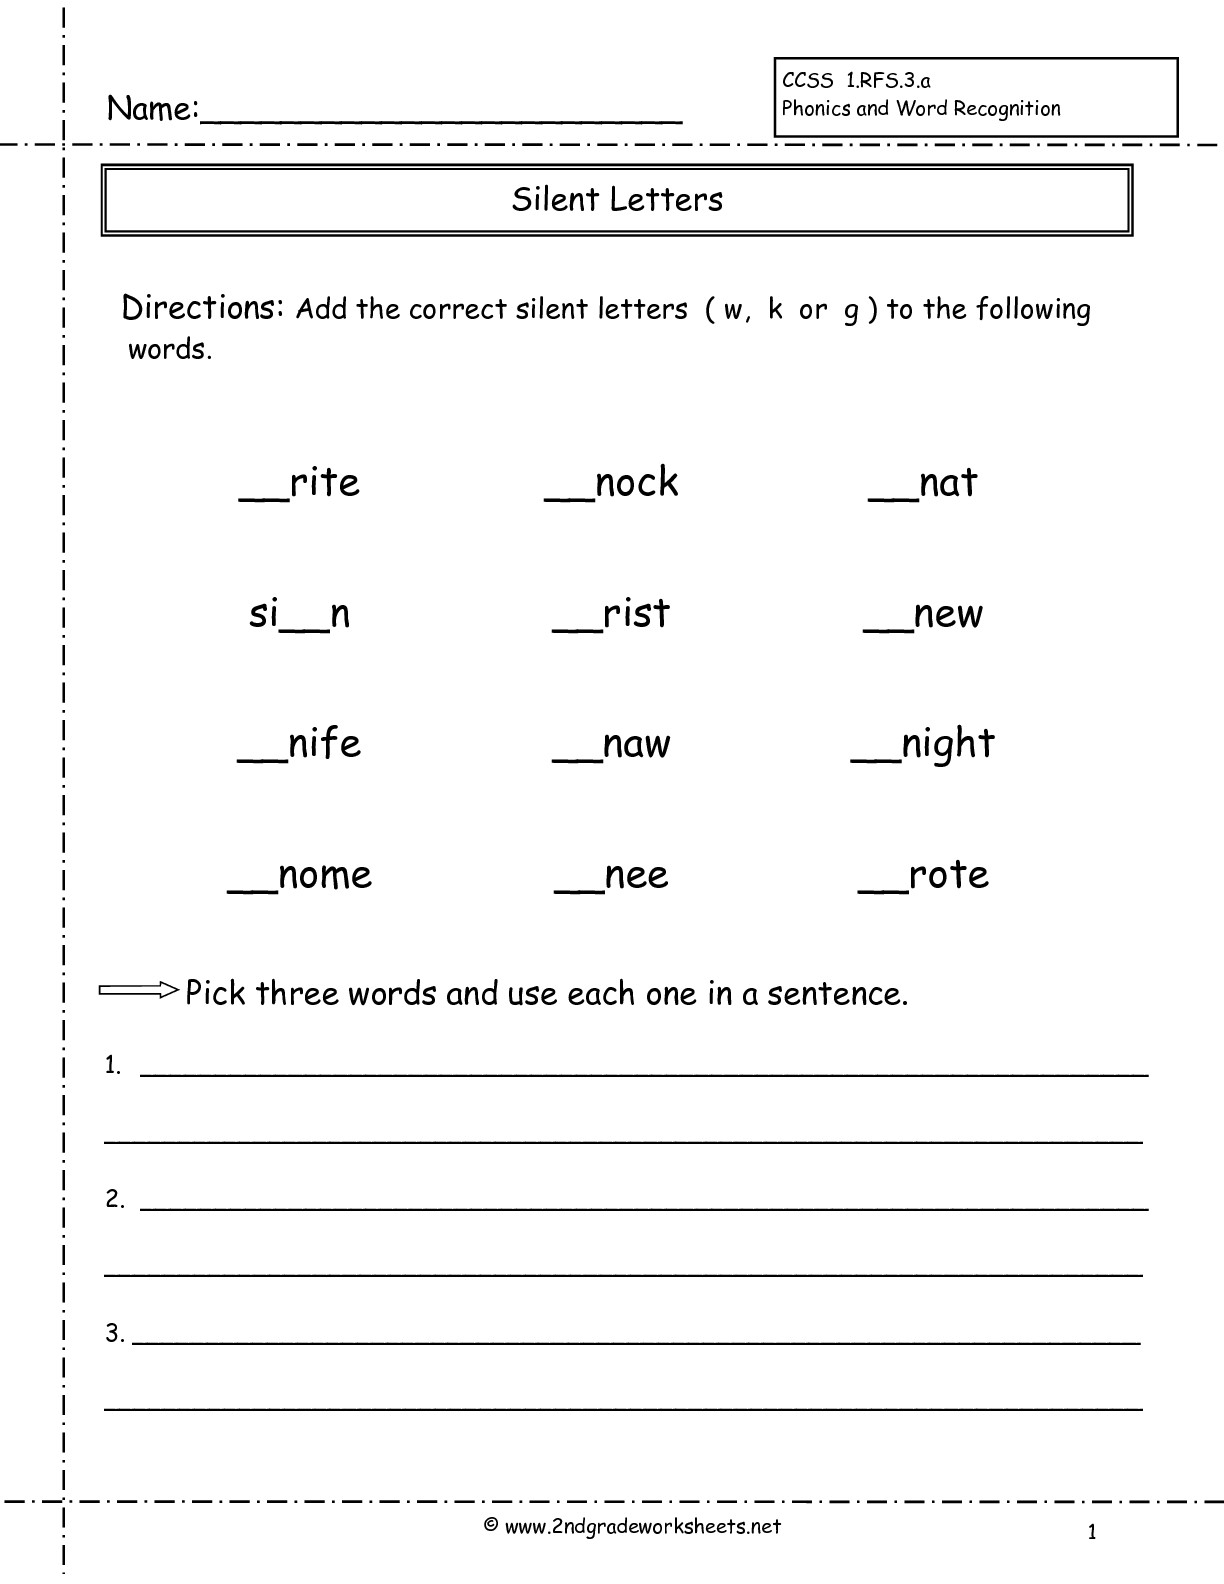 Second Grade Phonics Worksheets And Flashcards intended for Letter 2 Worksheets